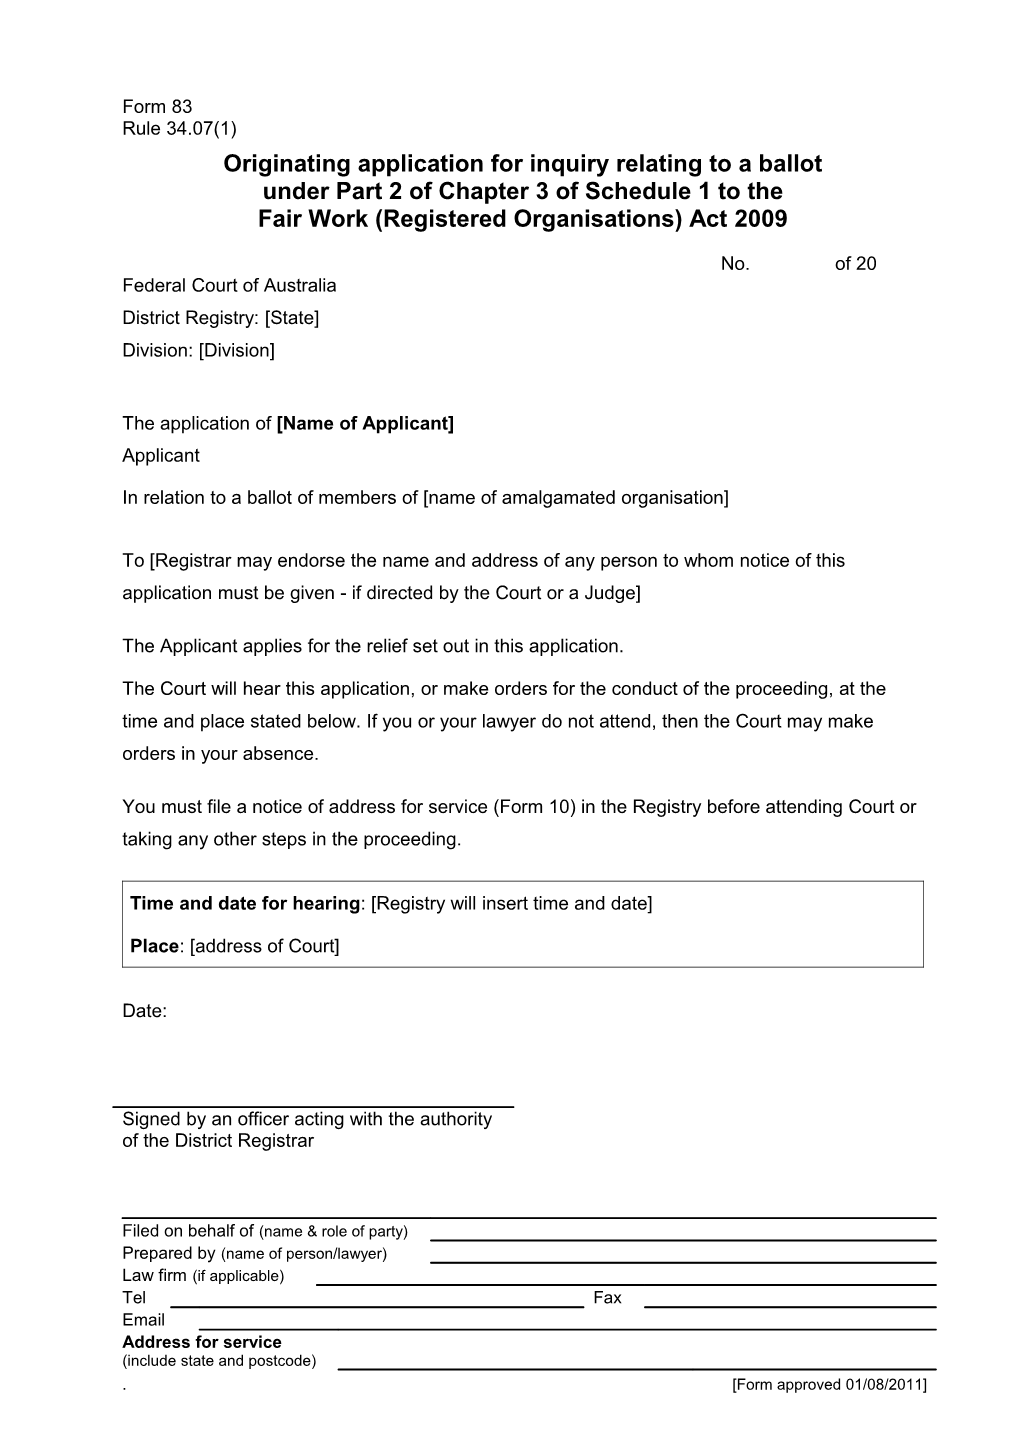 Form 83: Originating Application for Inquiry Relating to a Ballot Under Part 2 of Chapter